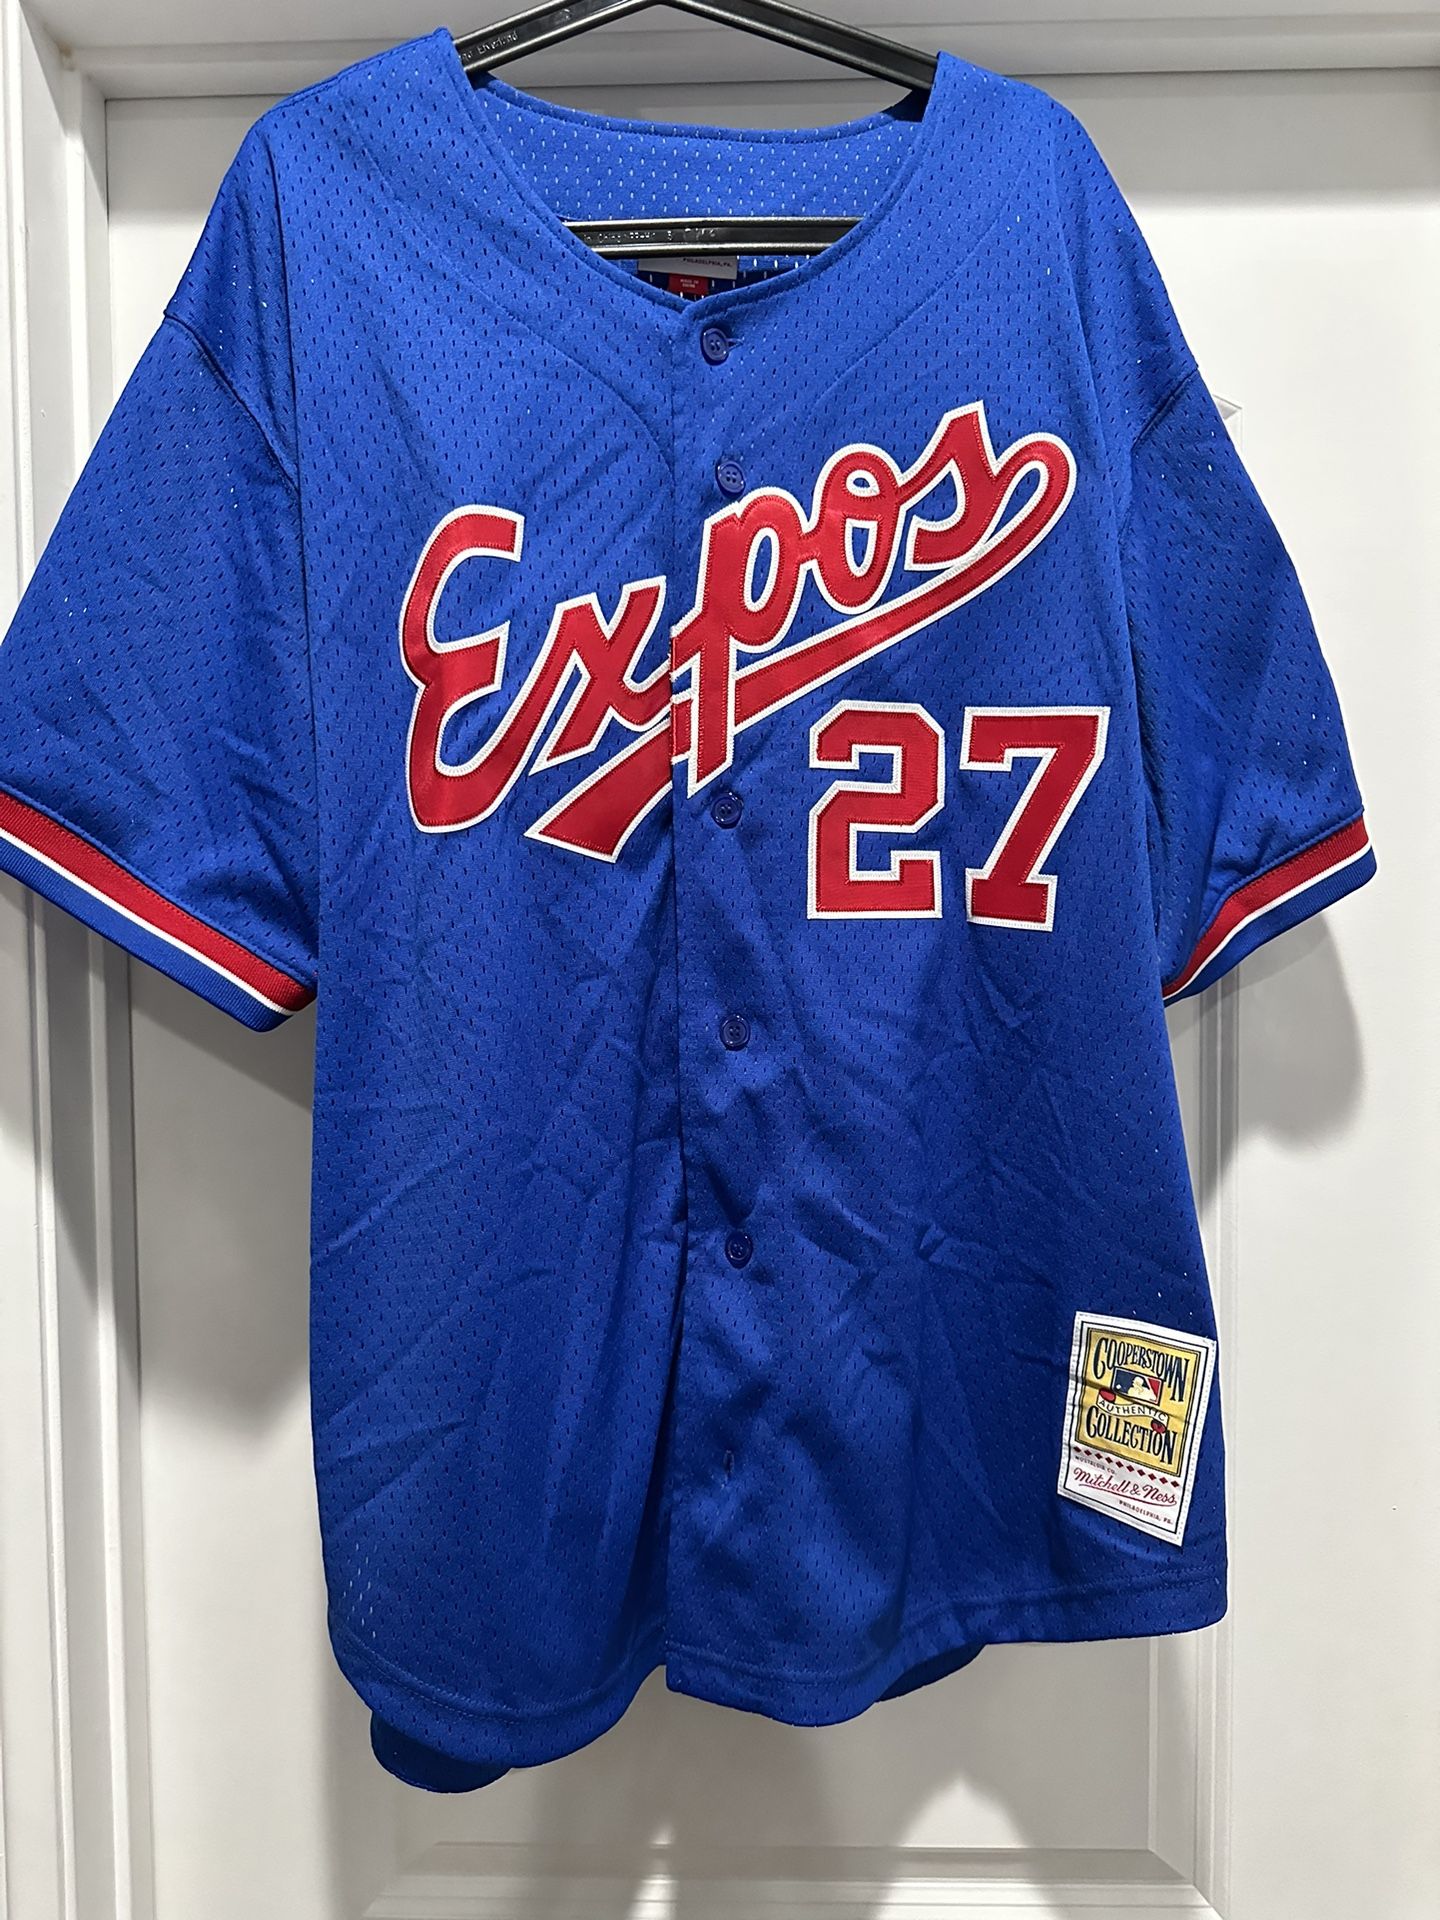 Expos Guerrero Mitchell N Ness BP Jersey NWT for Sale in Chula Vista, CA -  OfferUp